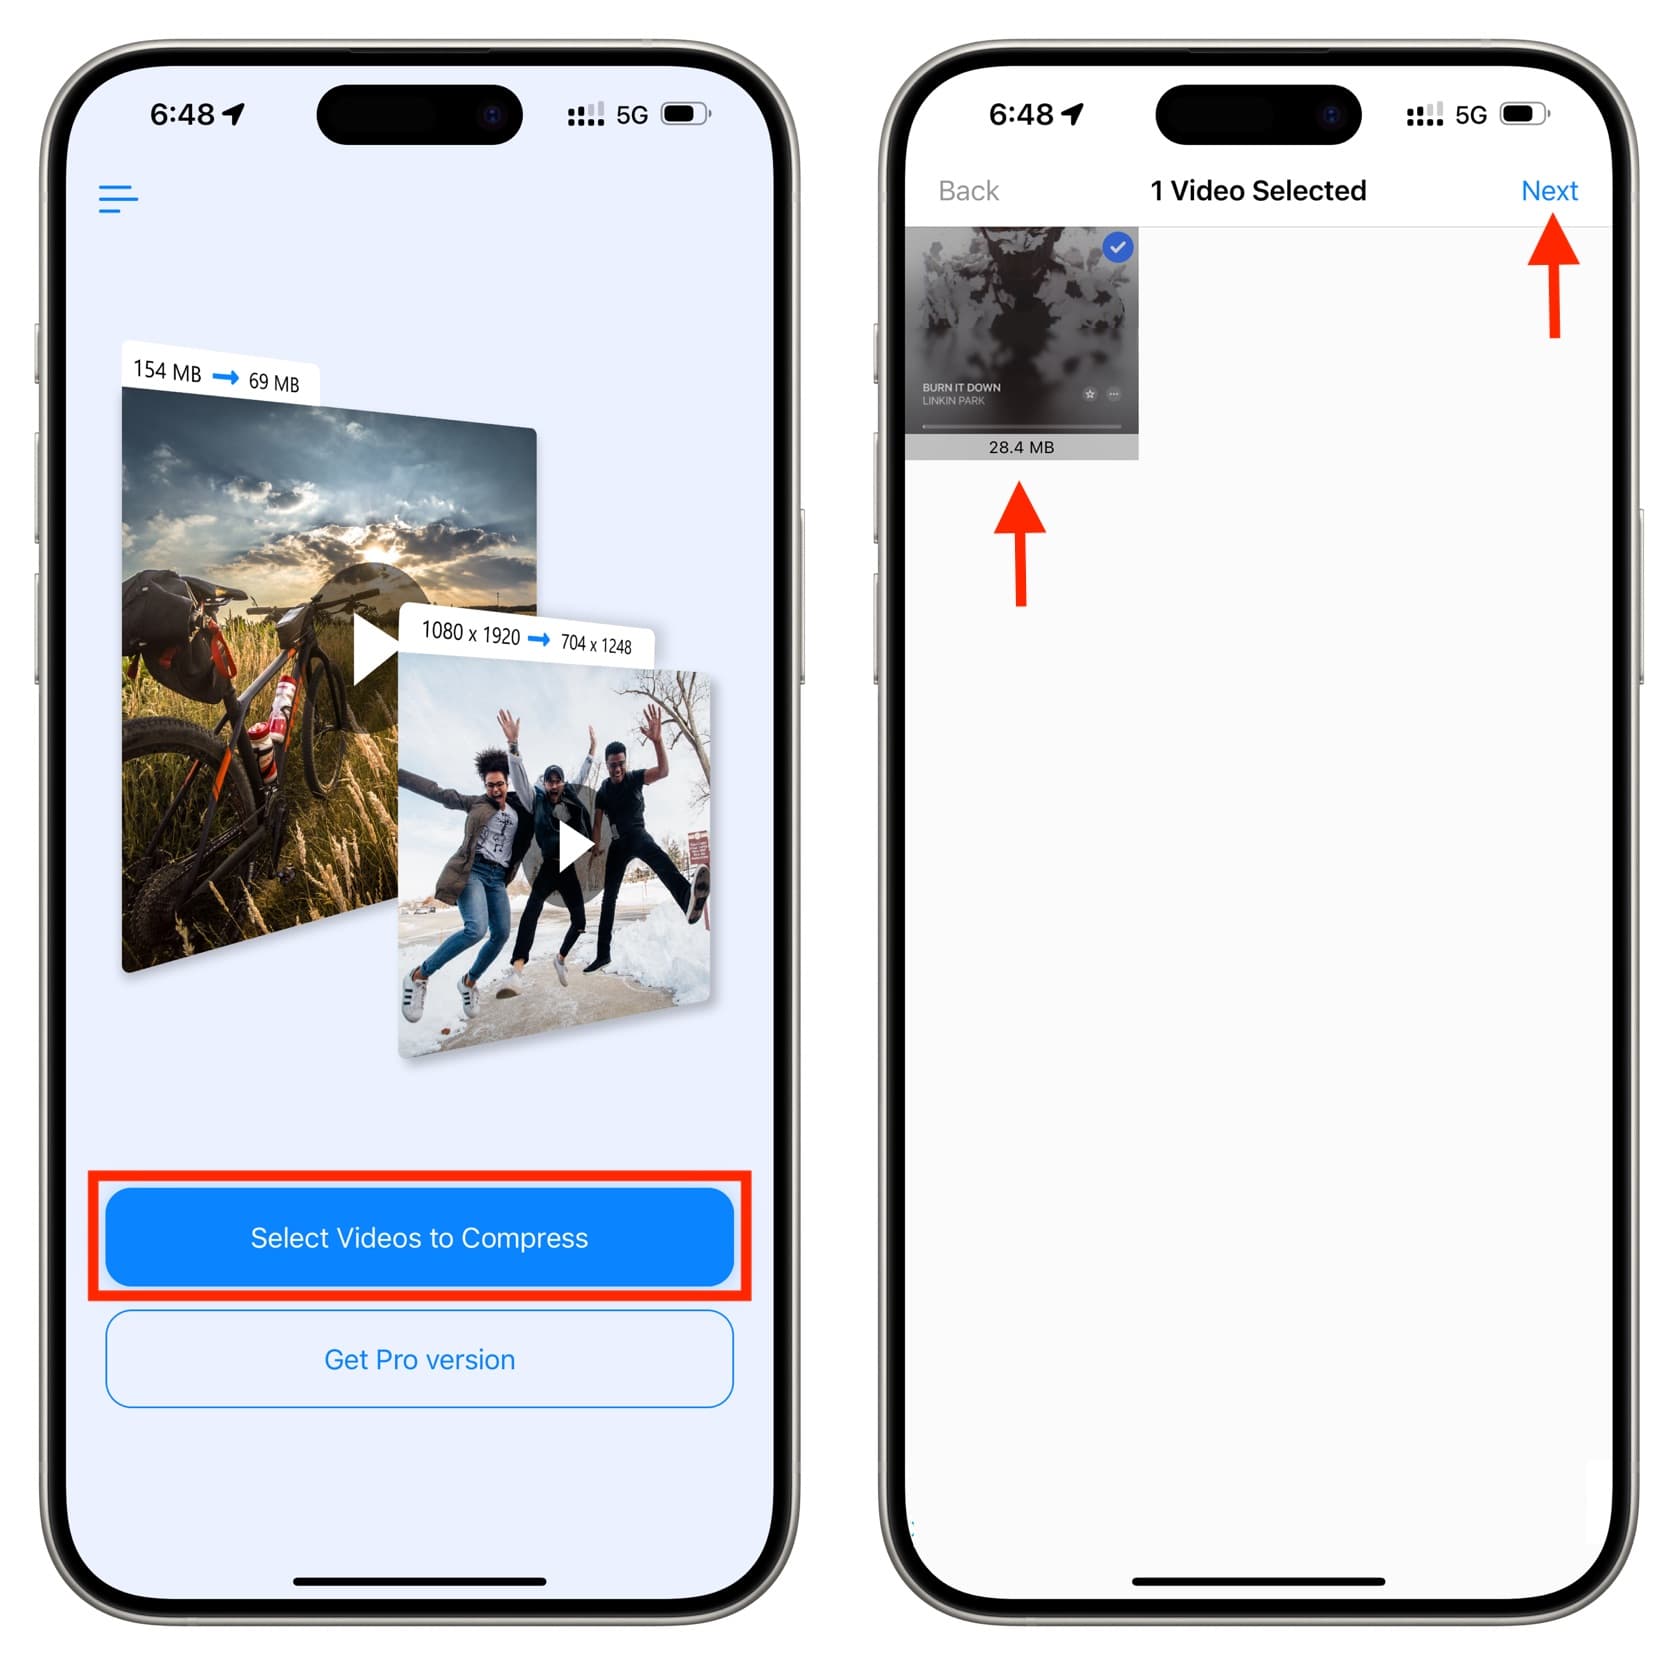 Select Videos to Compress on iPhone